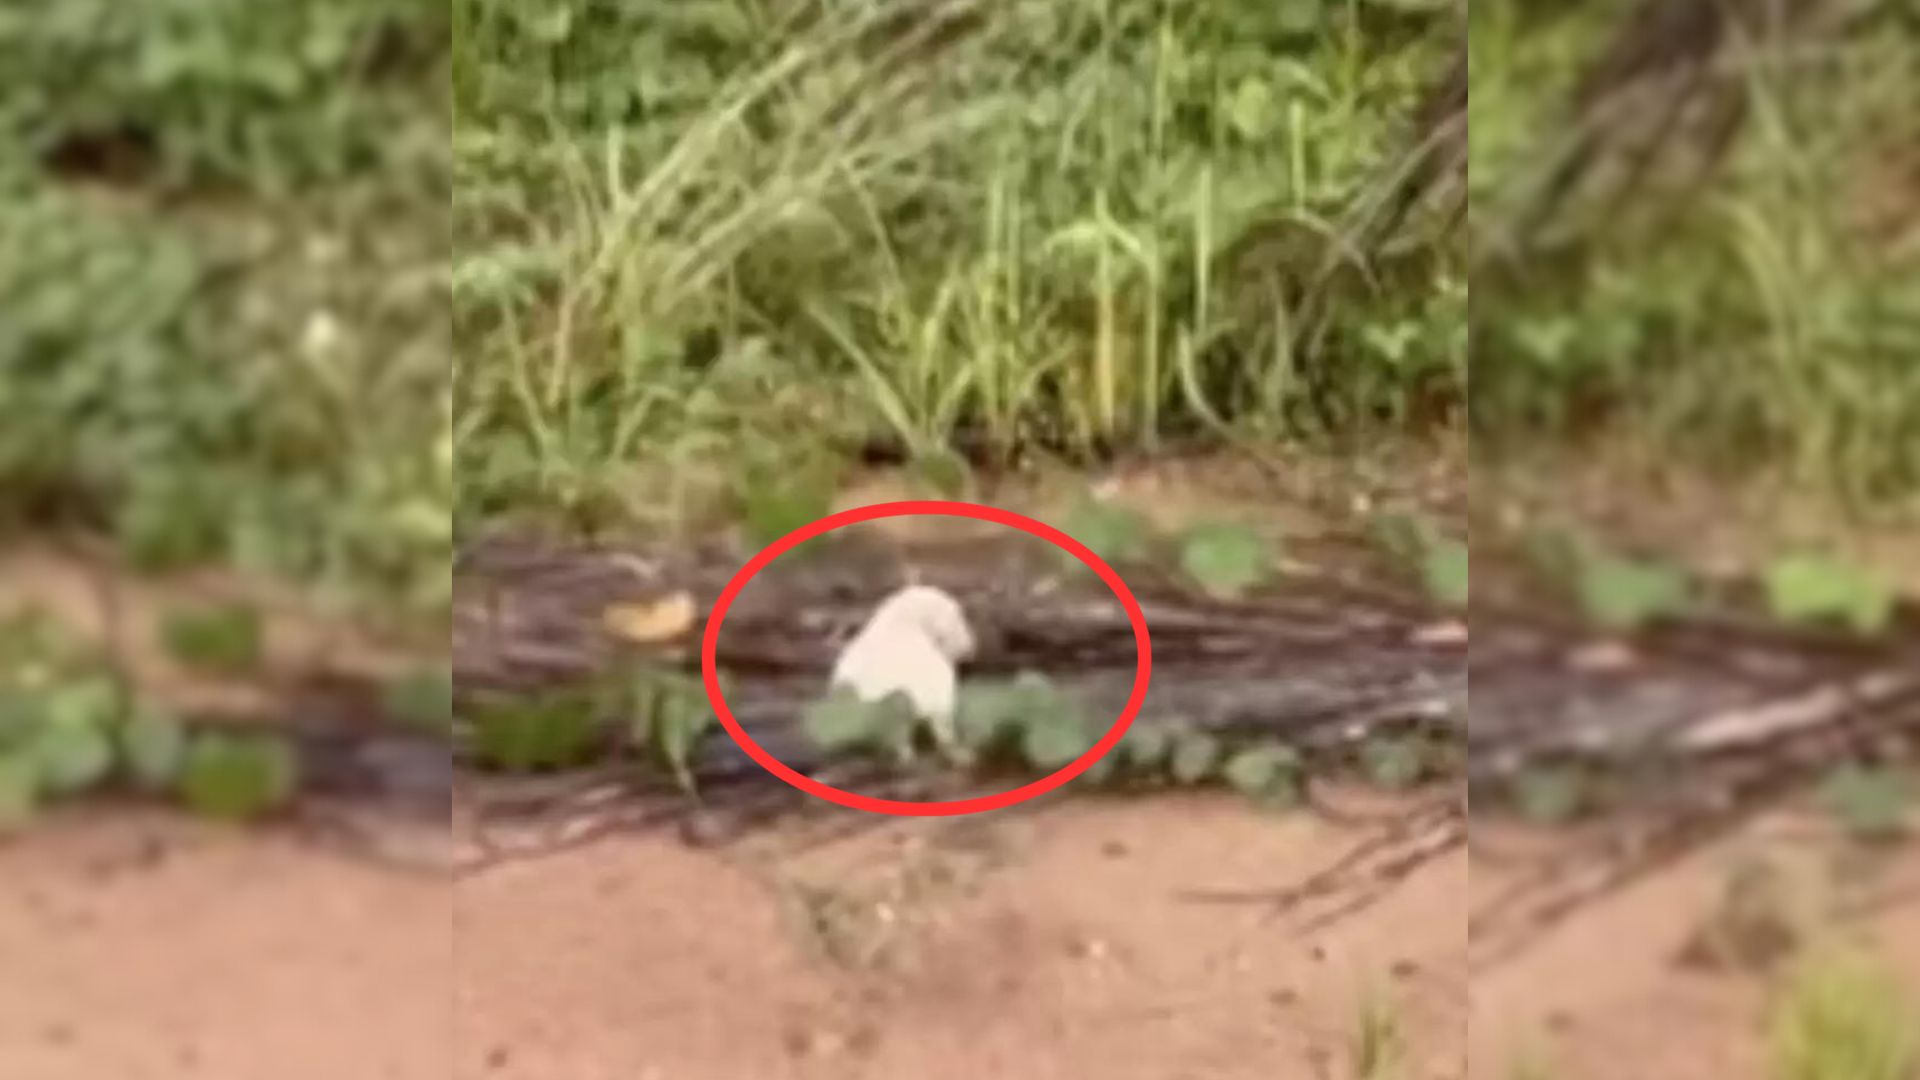 Man Passing Through The Forest Hears A Very Loud Scream And Is Shocked By What He Saw